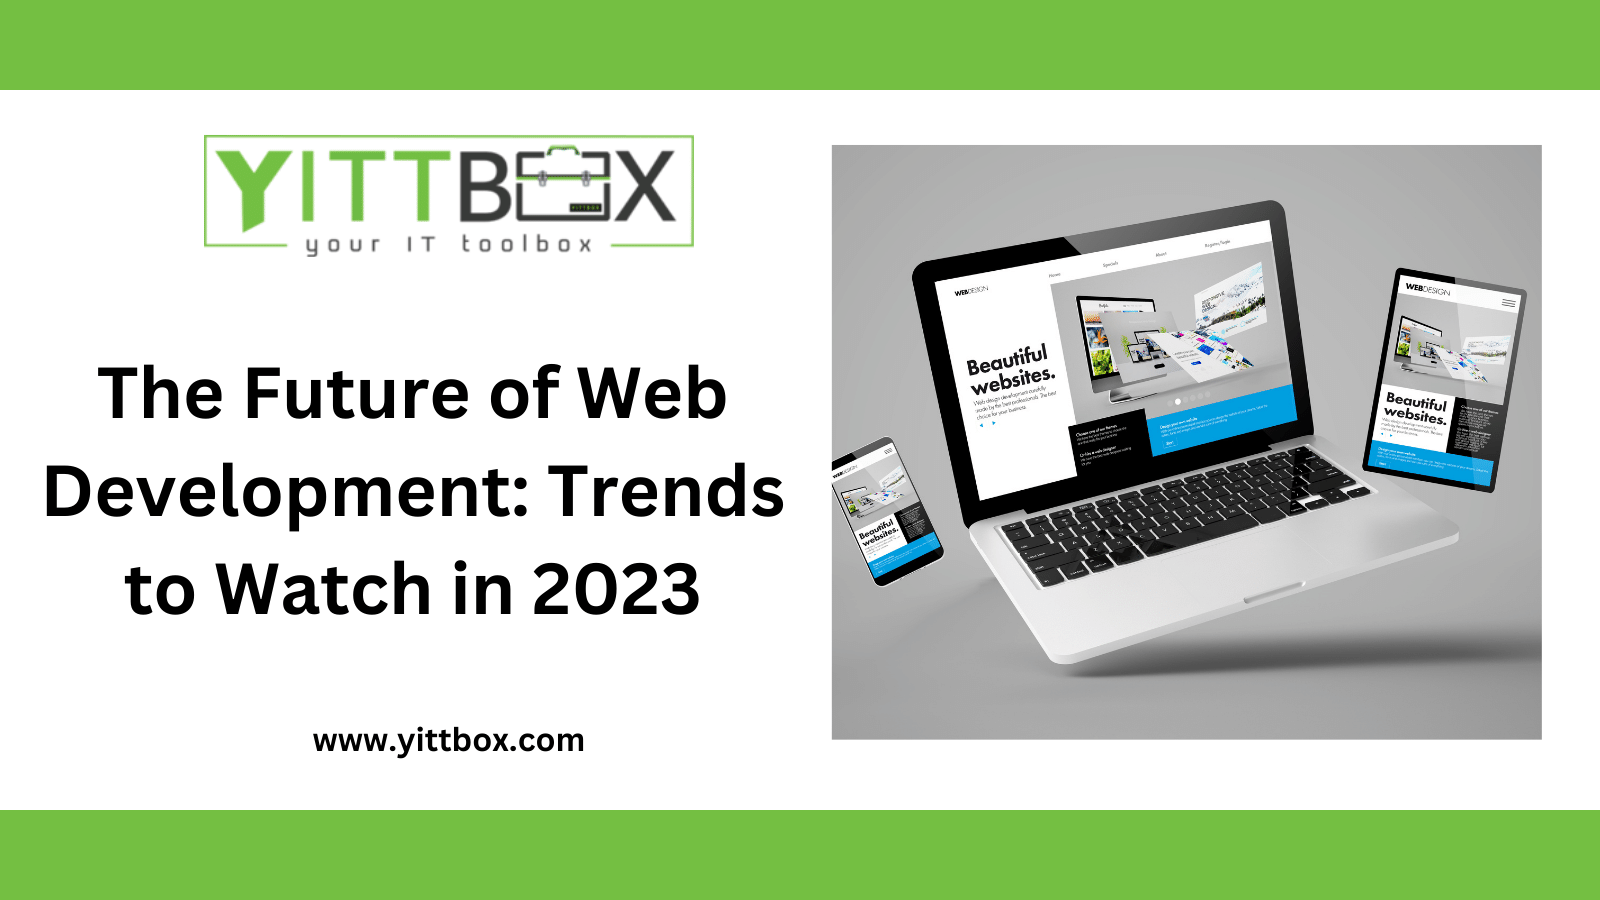 The Future of Web Development: Trends to Watch in 2023